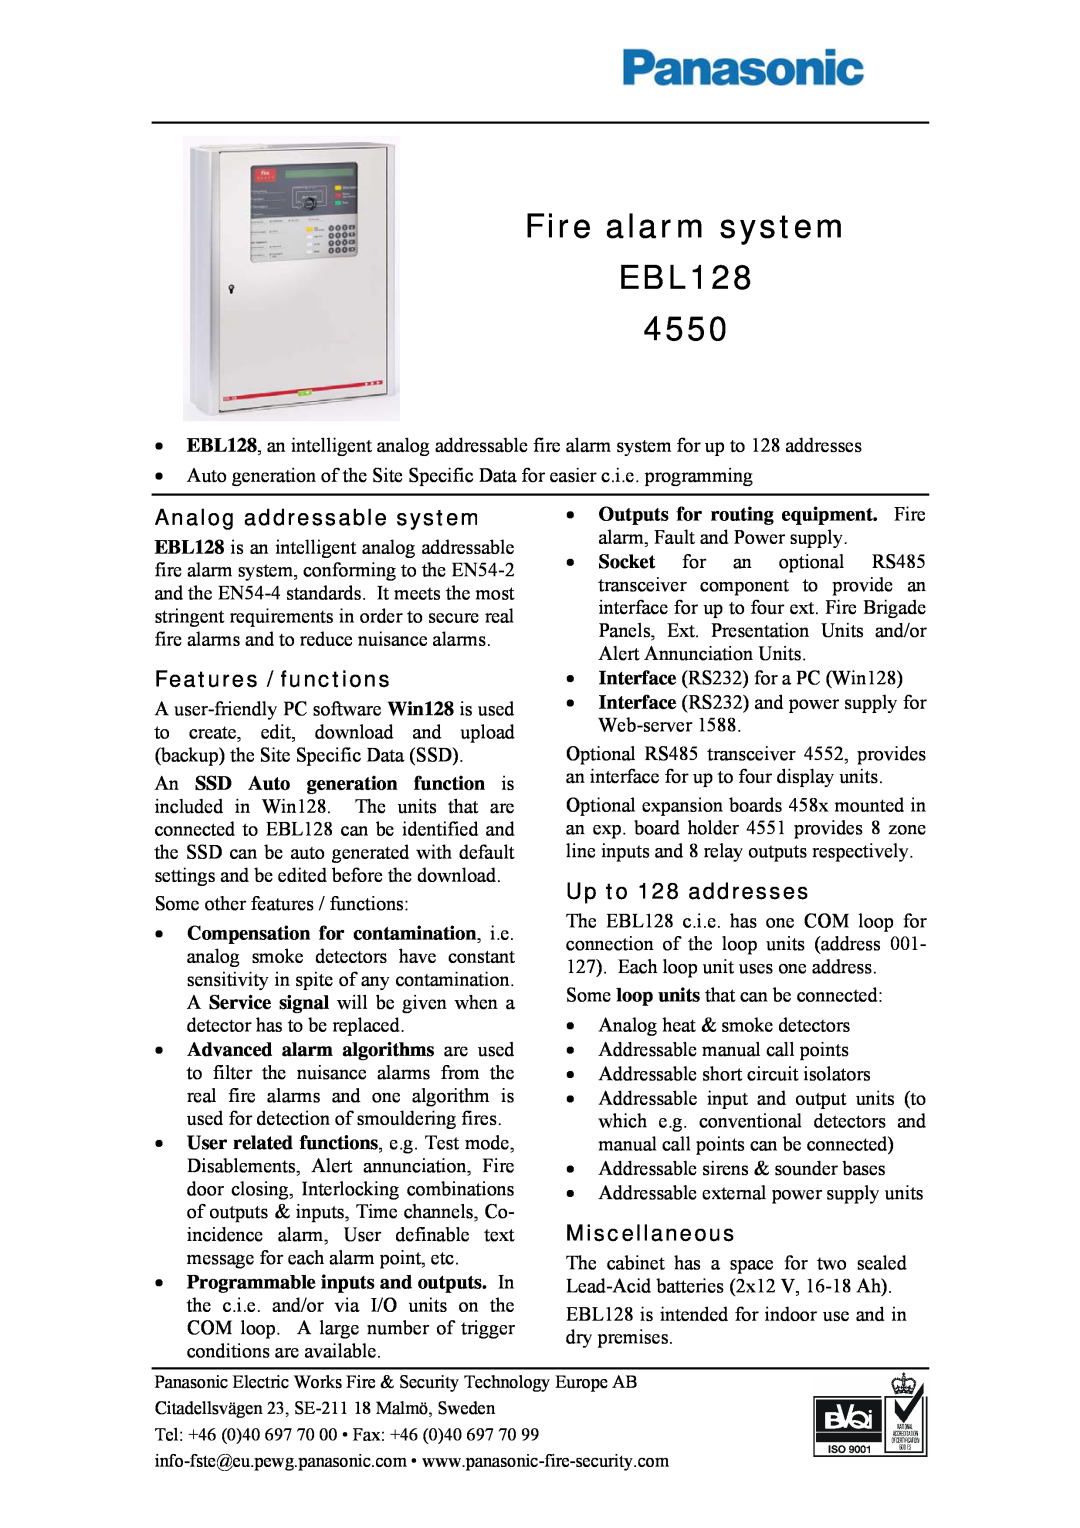 Panasonic manual Fire alarm system EBL128, Analog addressable system, Features / functions, Up to 128 addresses 